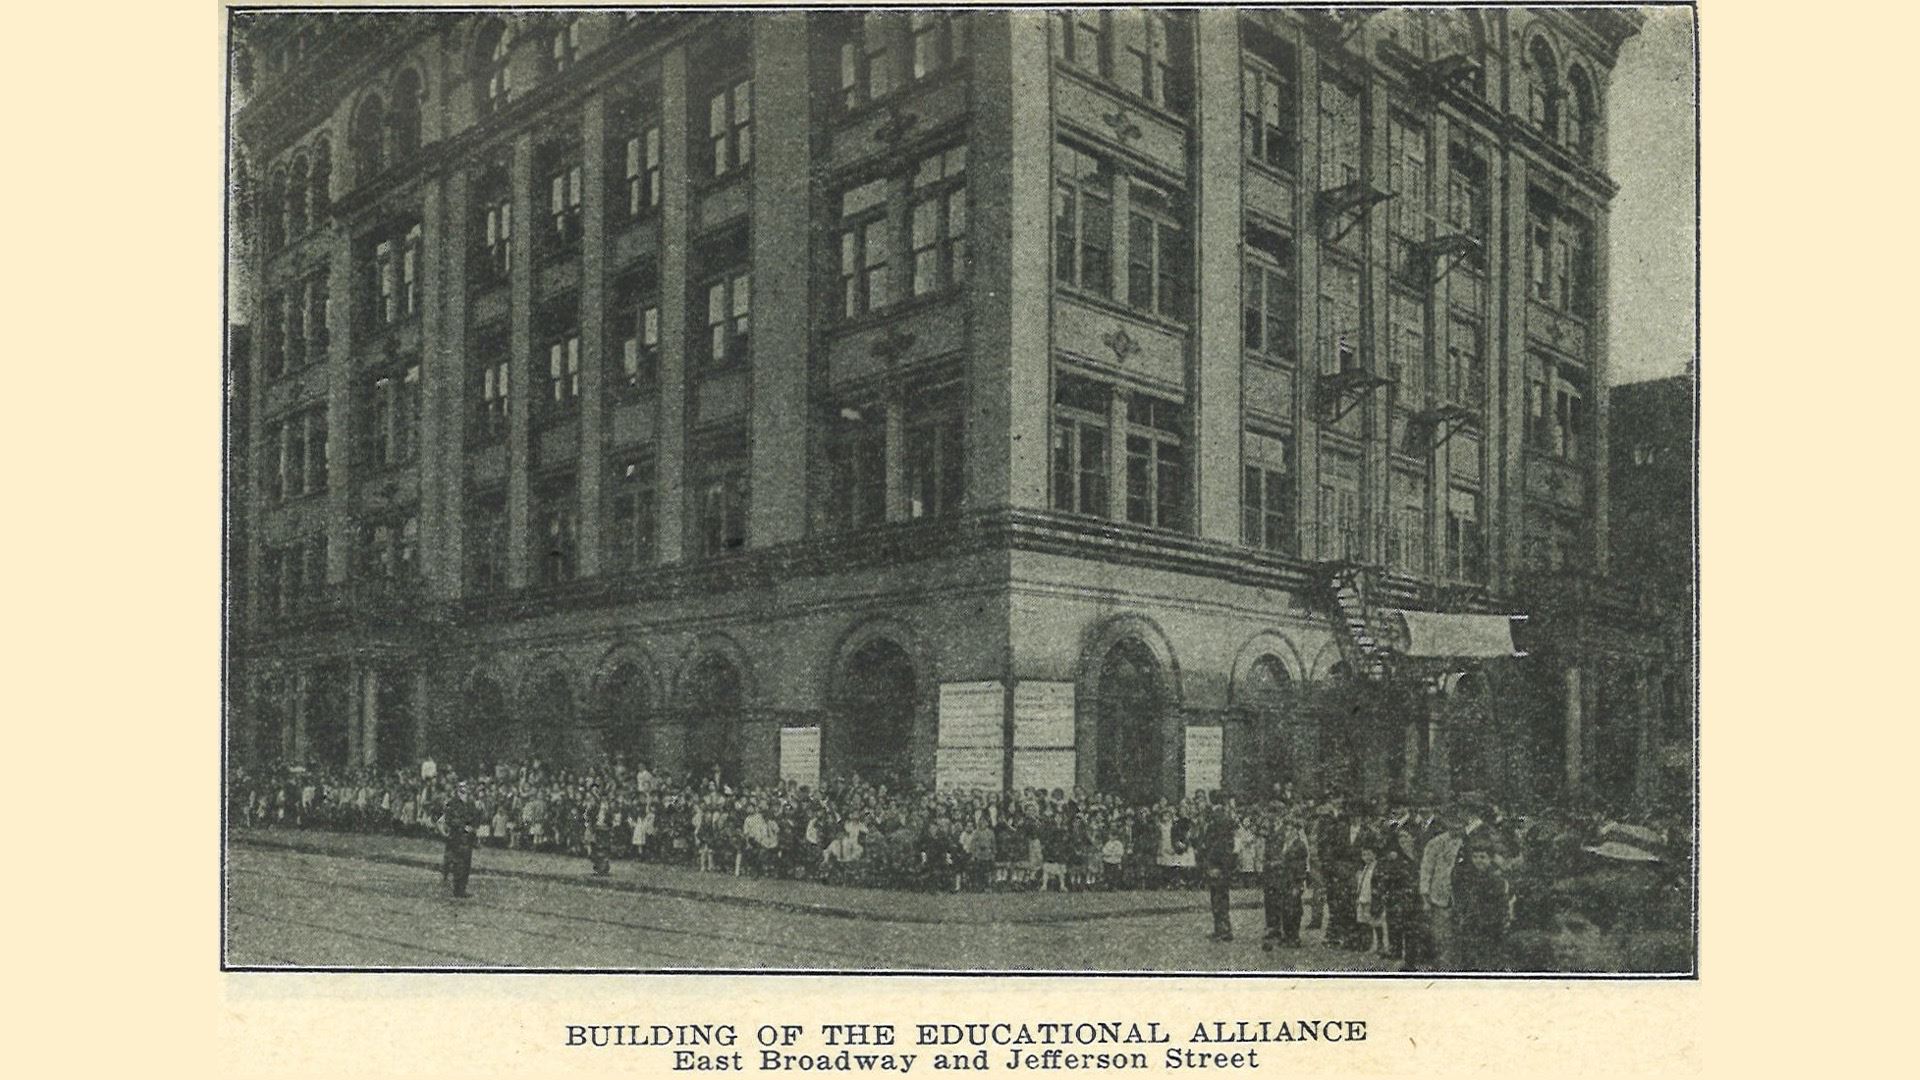 Old black and white photo of the flagship building of the Education Alliance at East Broadway